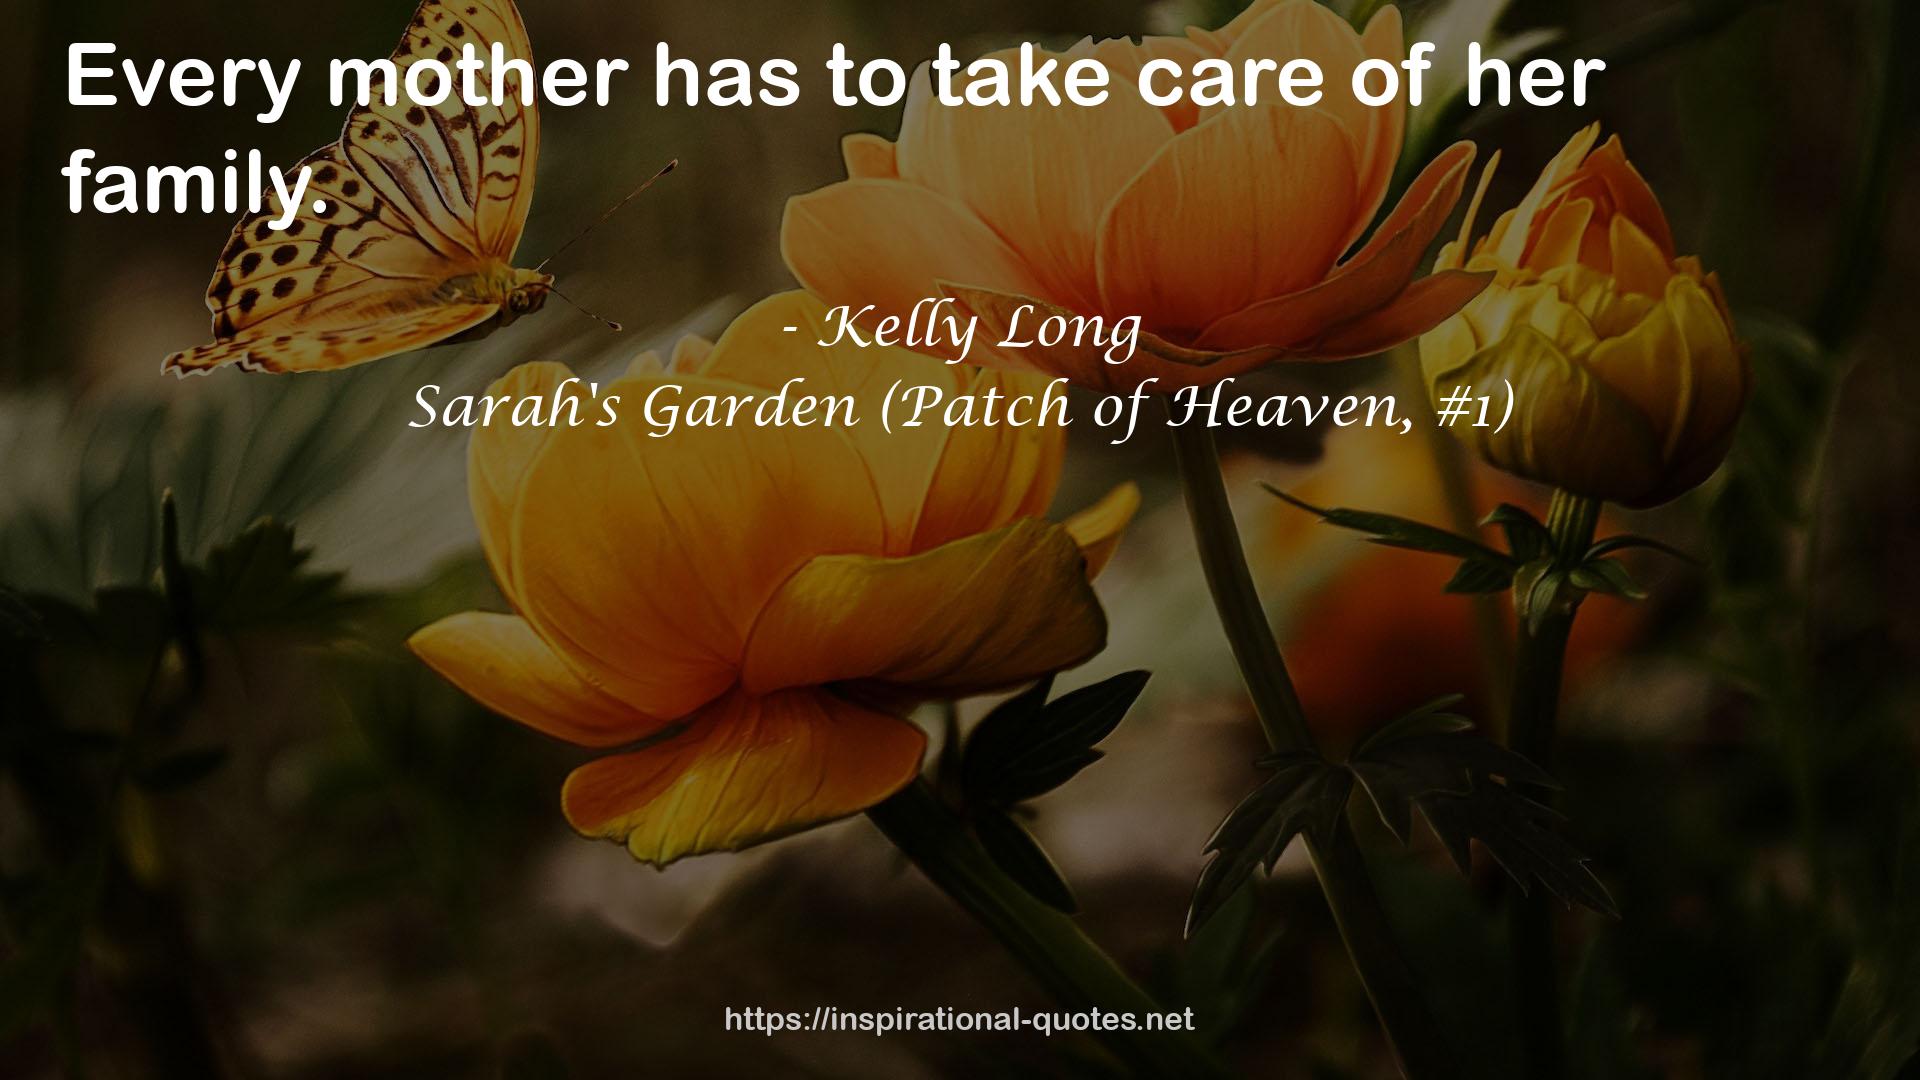 Sarah's Garden (Patch of Heaven, #1) QUOTES